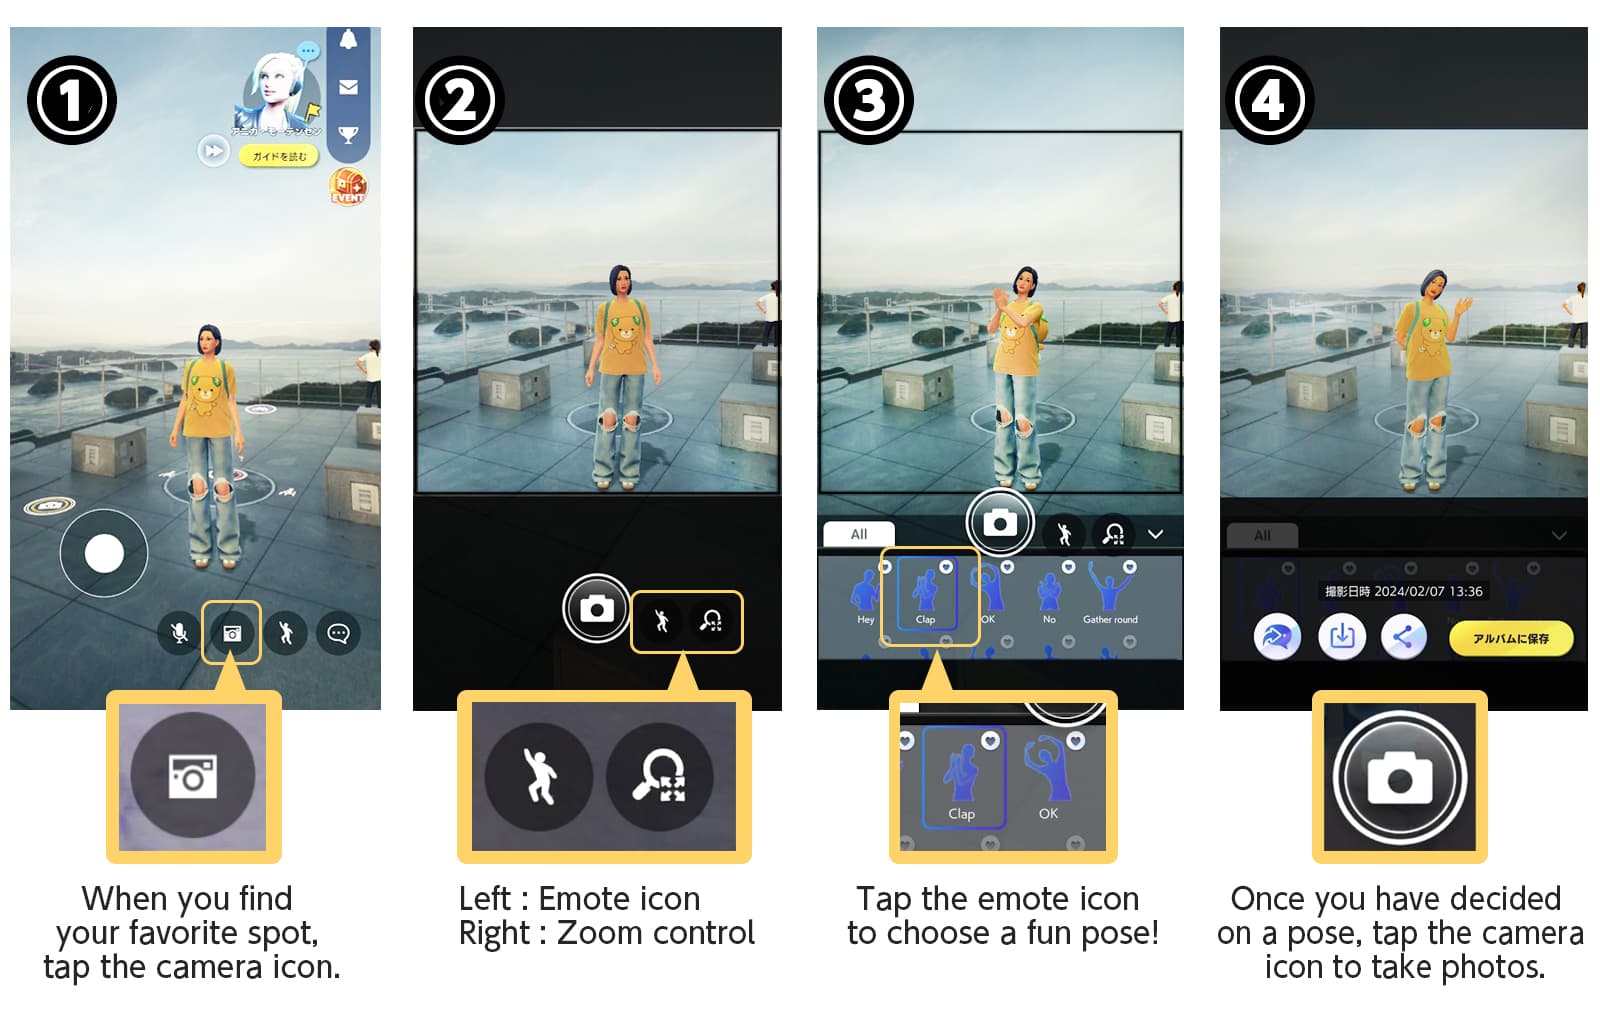 1.When you find your favorite spot, tap the camera icon. 2.Left: Emote icon,Right: Zoom control 3.Tap the emote icon to choose a fun pose! 4.Once you have decided on a pose, tap the camera icon to take photos.